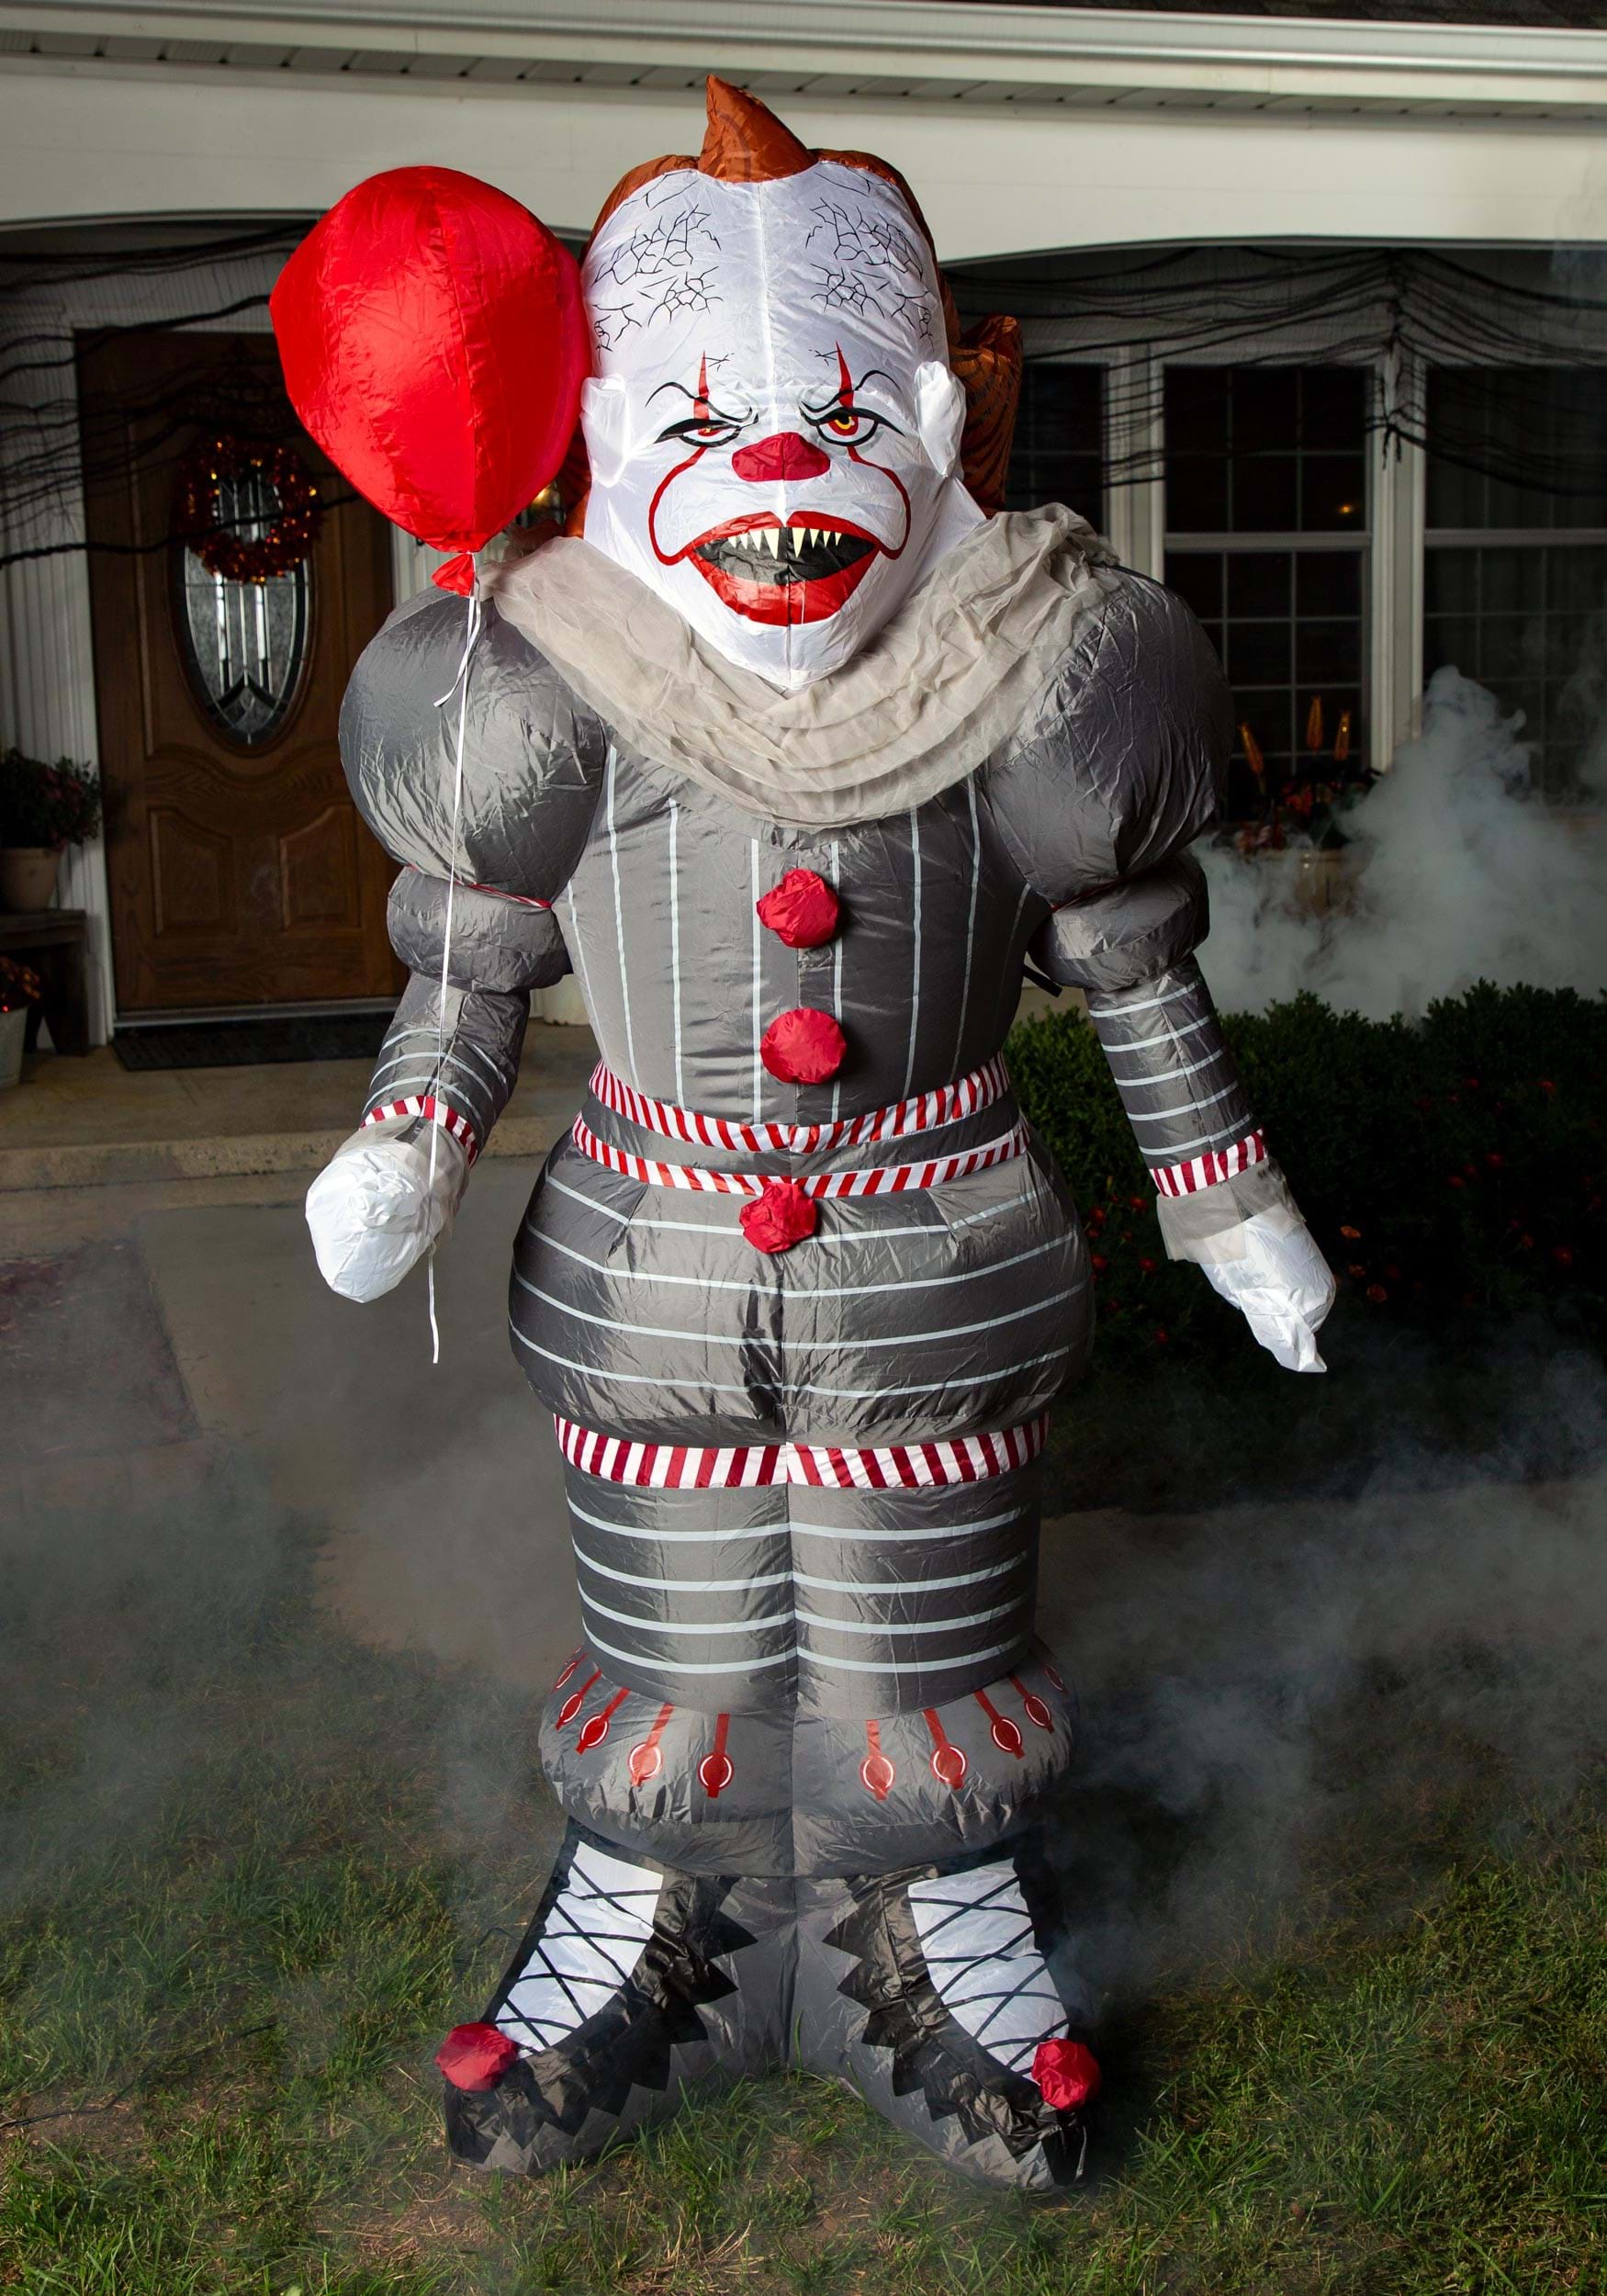 Stylish pennywise halloween decoration ideas for a spooky and chic Halloween